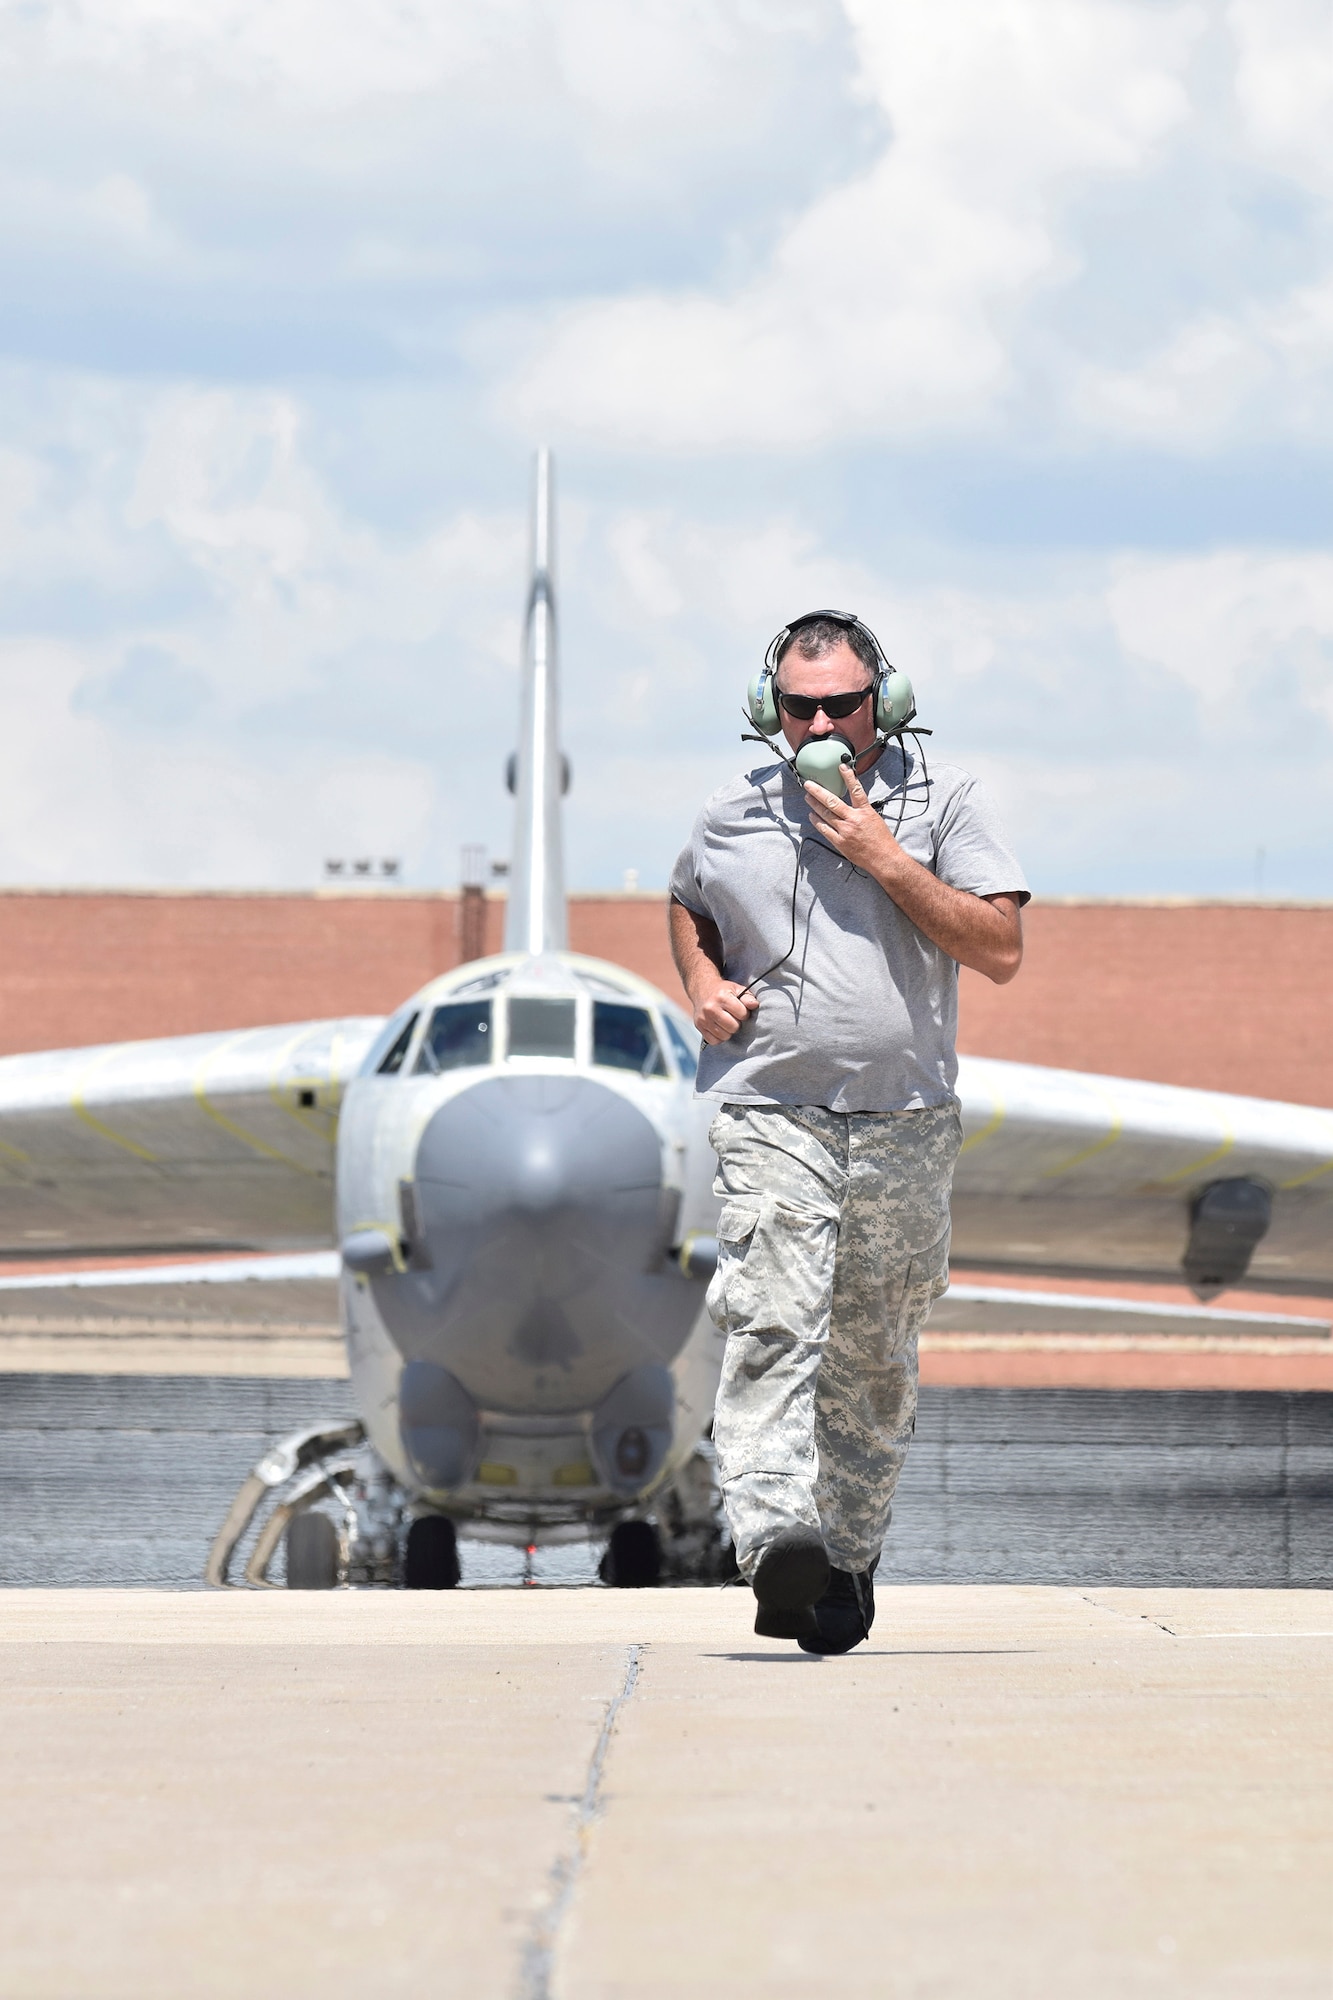 Mark Smith, 565th Aircraft Maintenance Squadron B-52H crew chief runs to position himself in front of B-52H 61-0007, 'Ghost Rider,' in order to launch the aircraft on an attempted functional test flight at the Oklahoma City Air Logistics Complex, Aug. 29, 2016, Tinker Air Force Base, Okla. 'Ghost Rider' is the first B-52H to ever be regenerated from long-term storage with the 309th Aerospace Maintenance and Regeneration Group at Davis-Monthan AFB, Ariz., and returned to fully-operational flying status. (U.S. Air Force photo/Greg L. Davis)